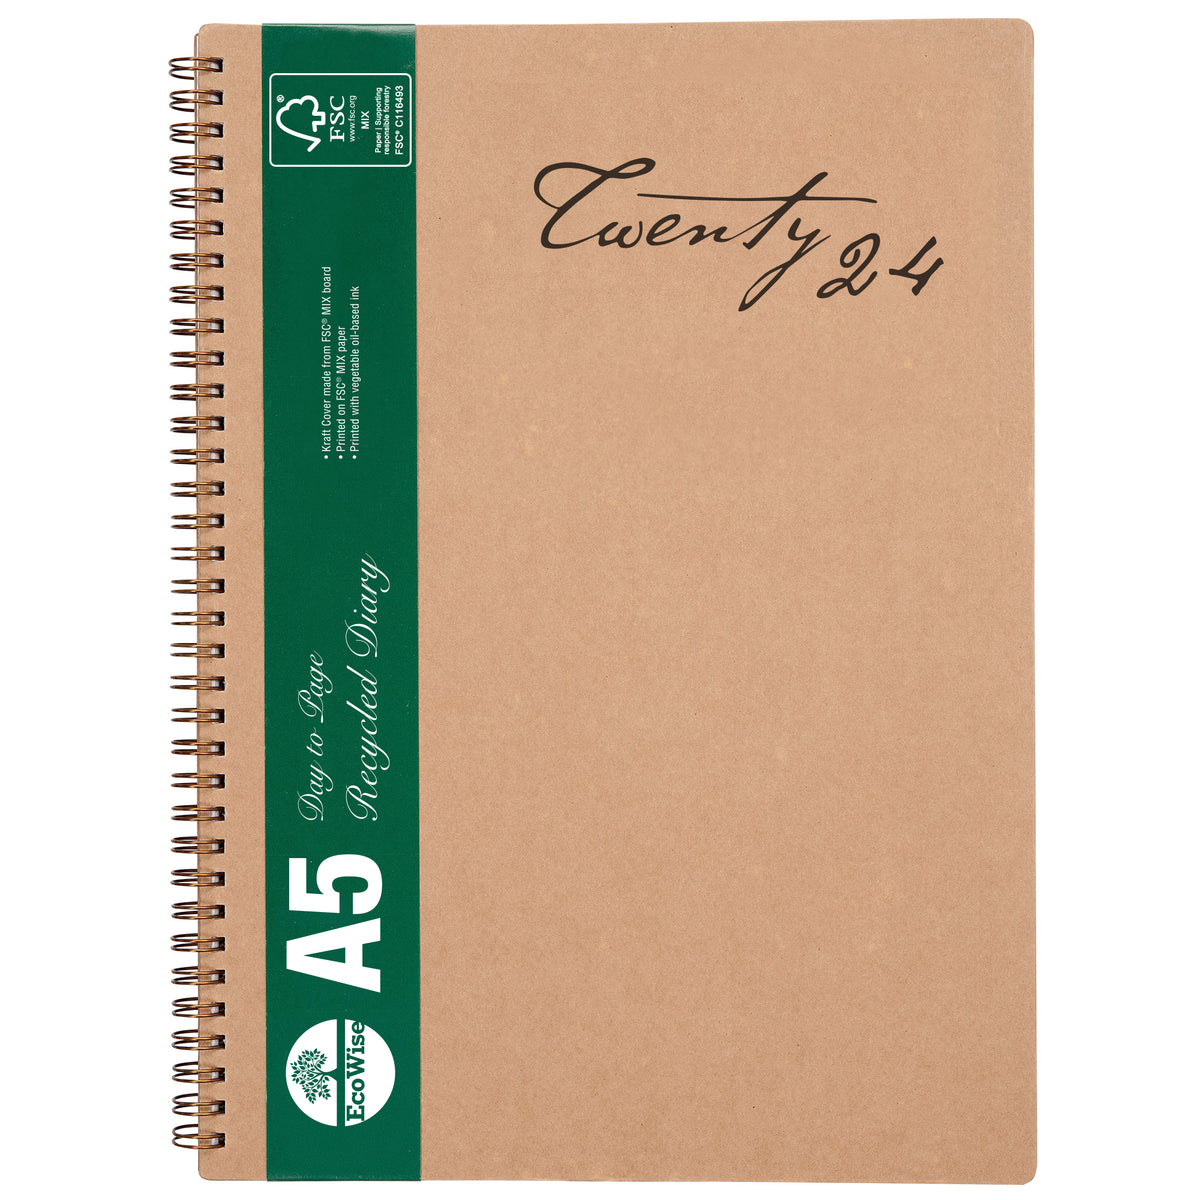 Cumberland Ecowise 2024 Diary Spiral A5 DTP Boardcover Recycled Kraft